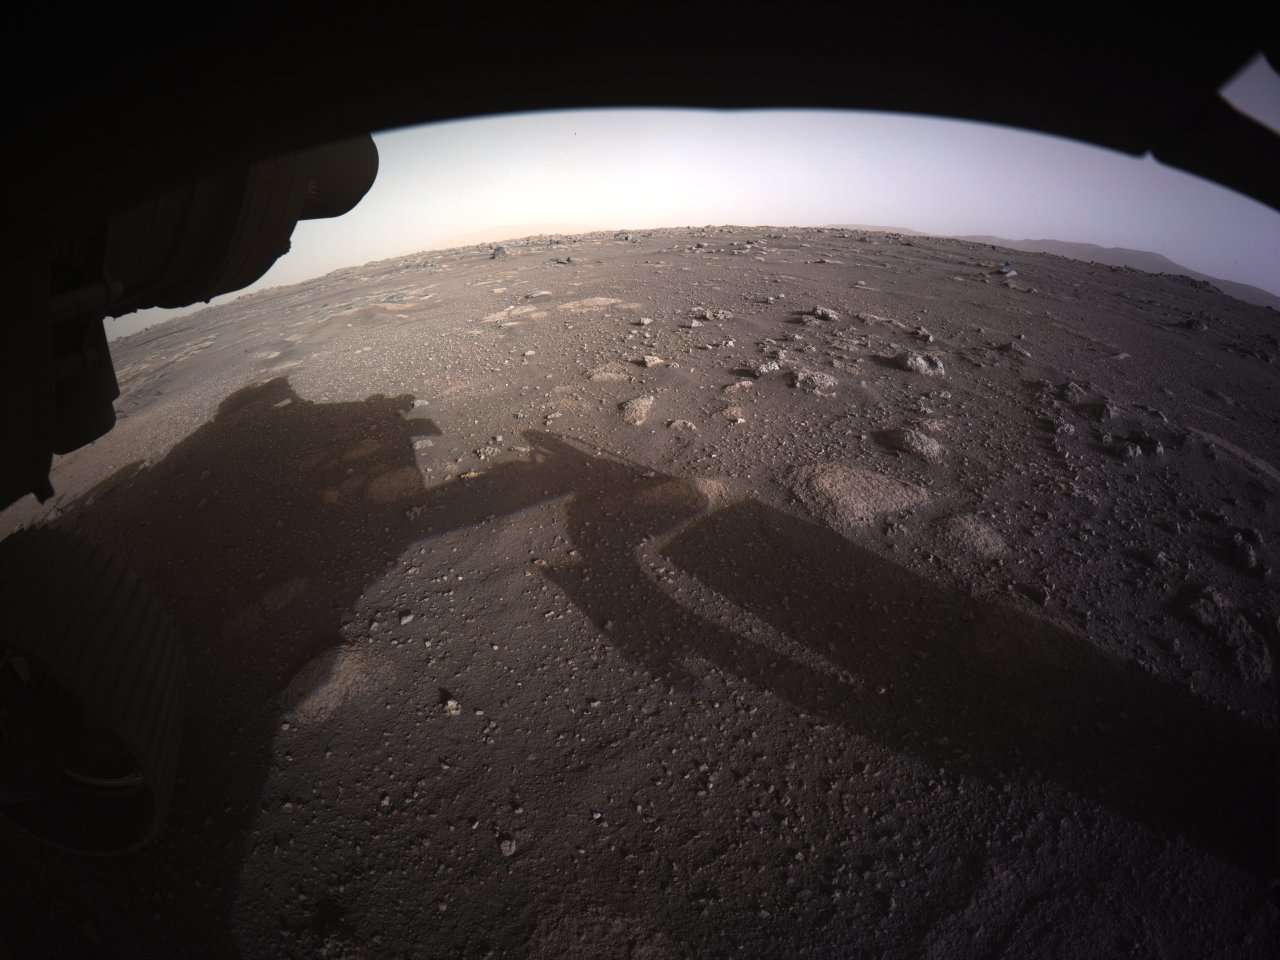 This shot from Persevarance’s hazard camera is the first color image taken by the rover, after the dust cover (that protected the camera from debris during landing) was removed. Credit: NASA/JPL-Caltech